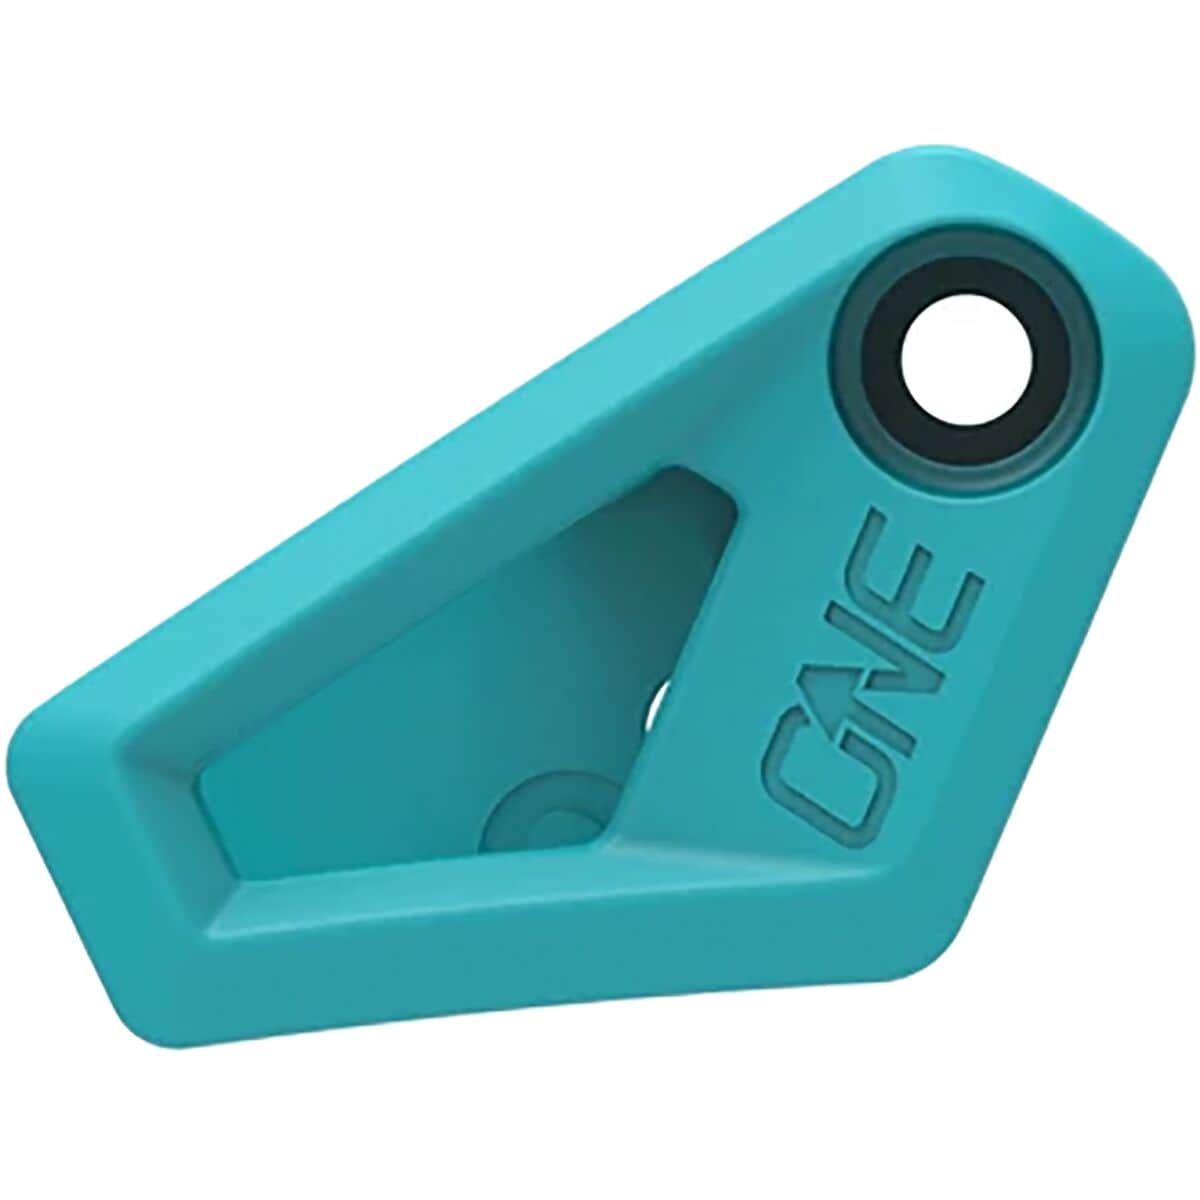 OneUp Components Oneup Chainguide Top Kit - V2 Turquoise, One size